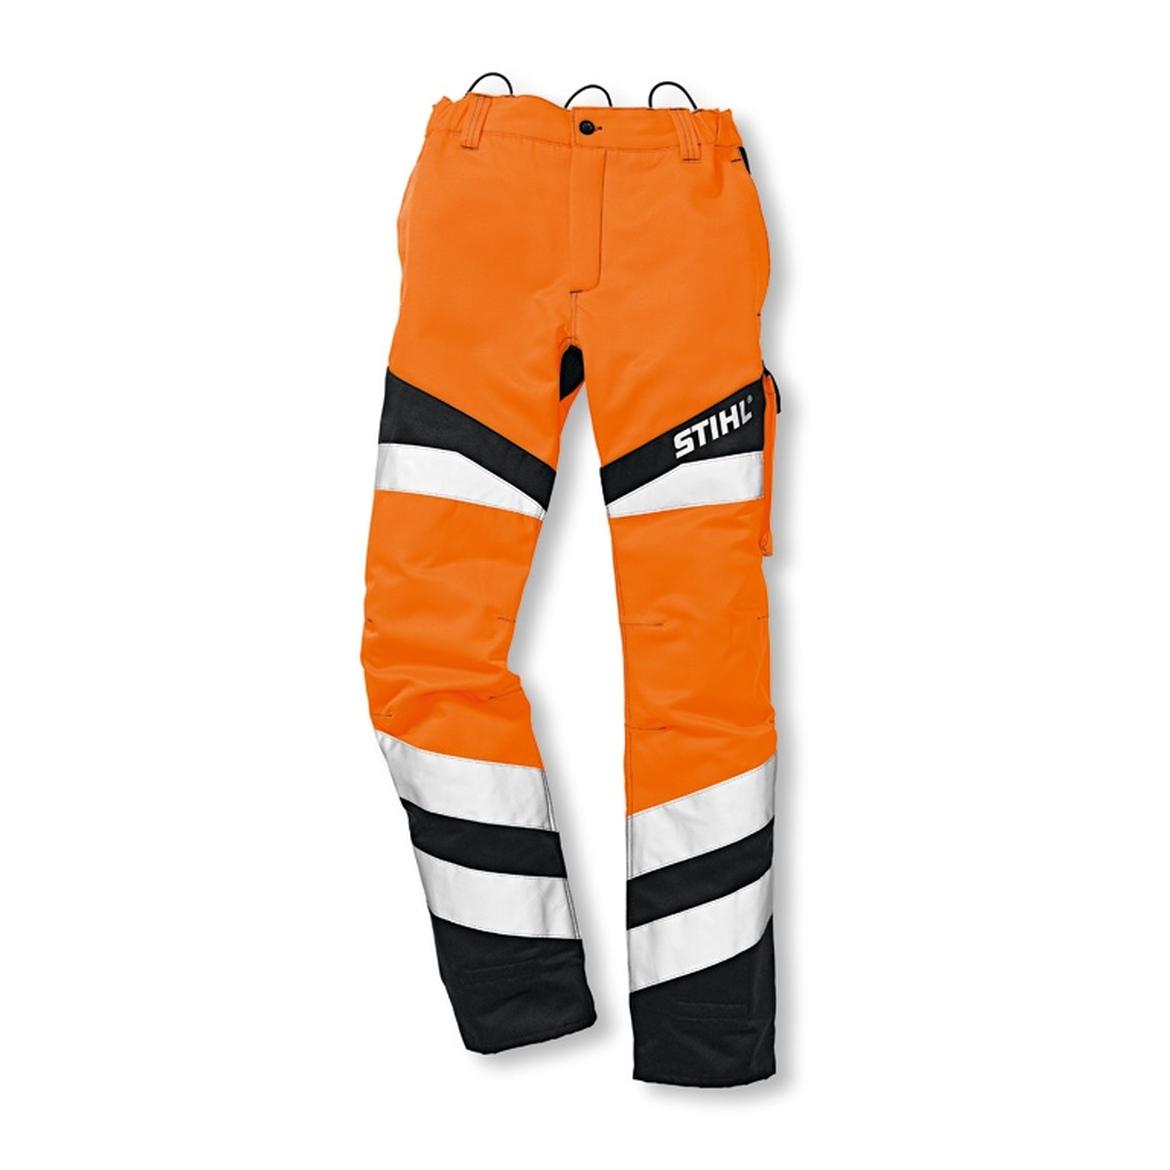 New boxed Stihl FS Protect Brushcutter trousers 00008886144 Small 32 waist 